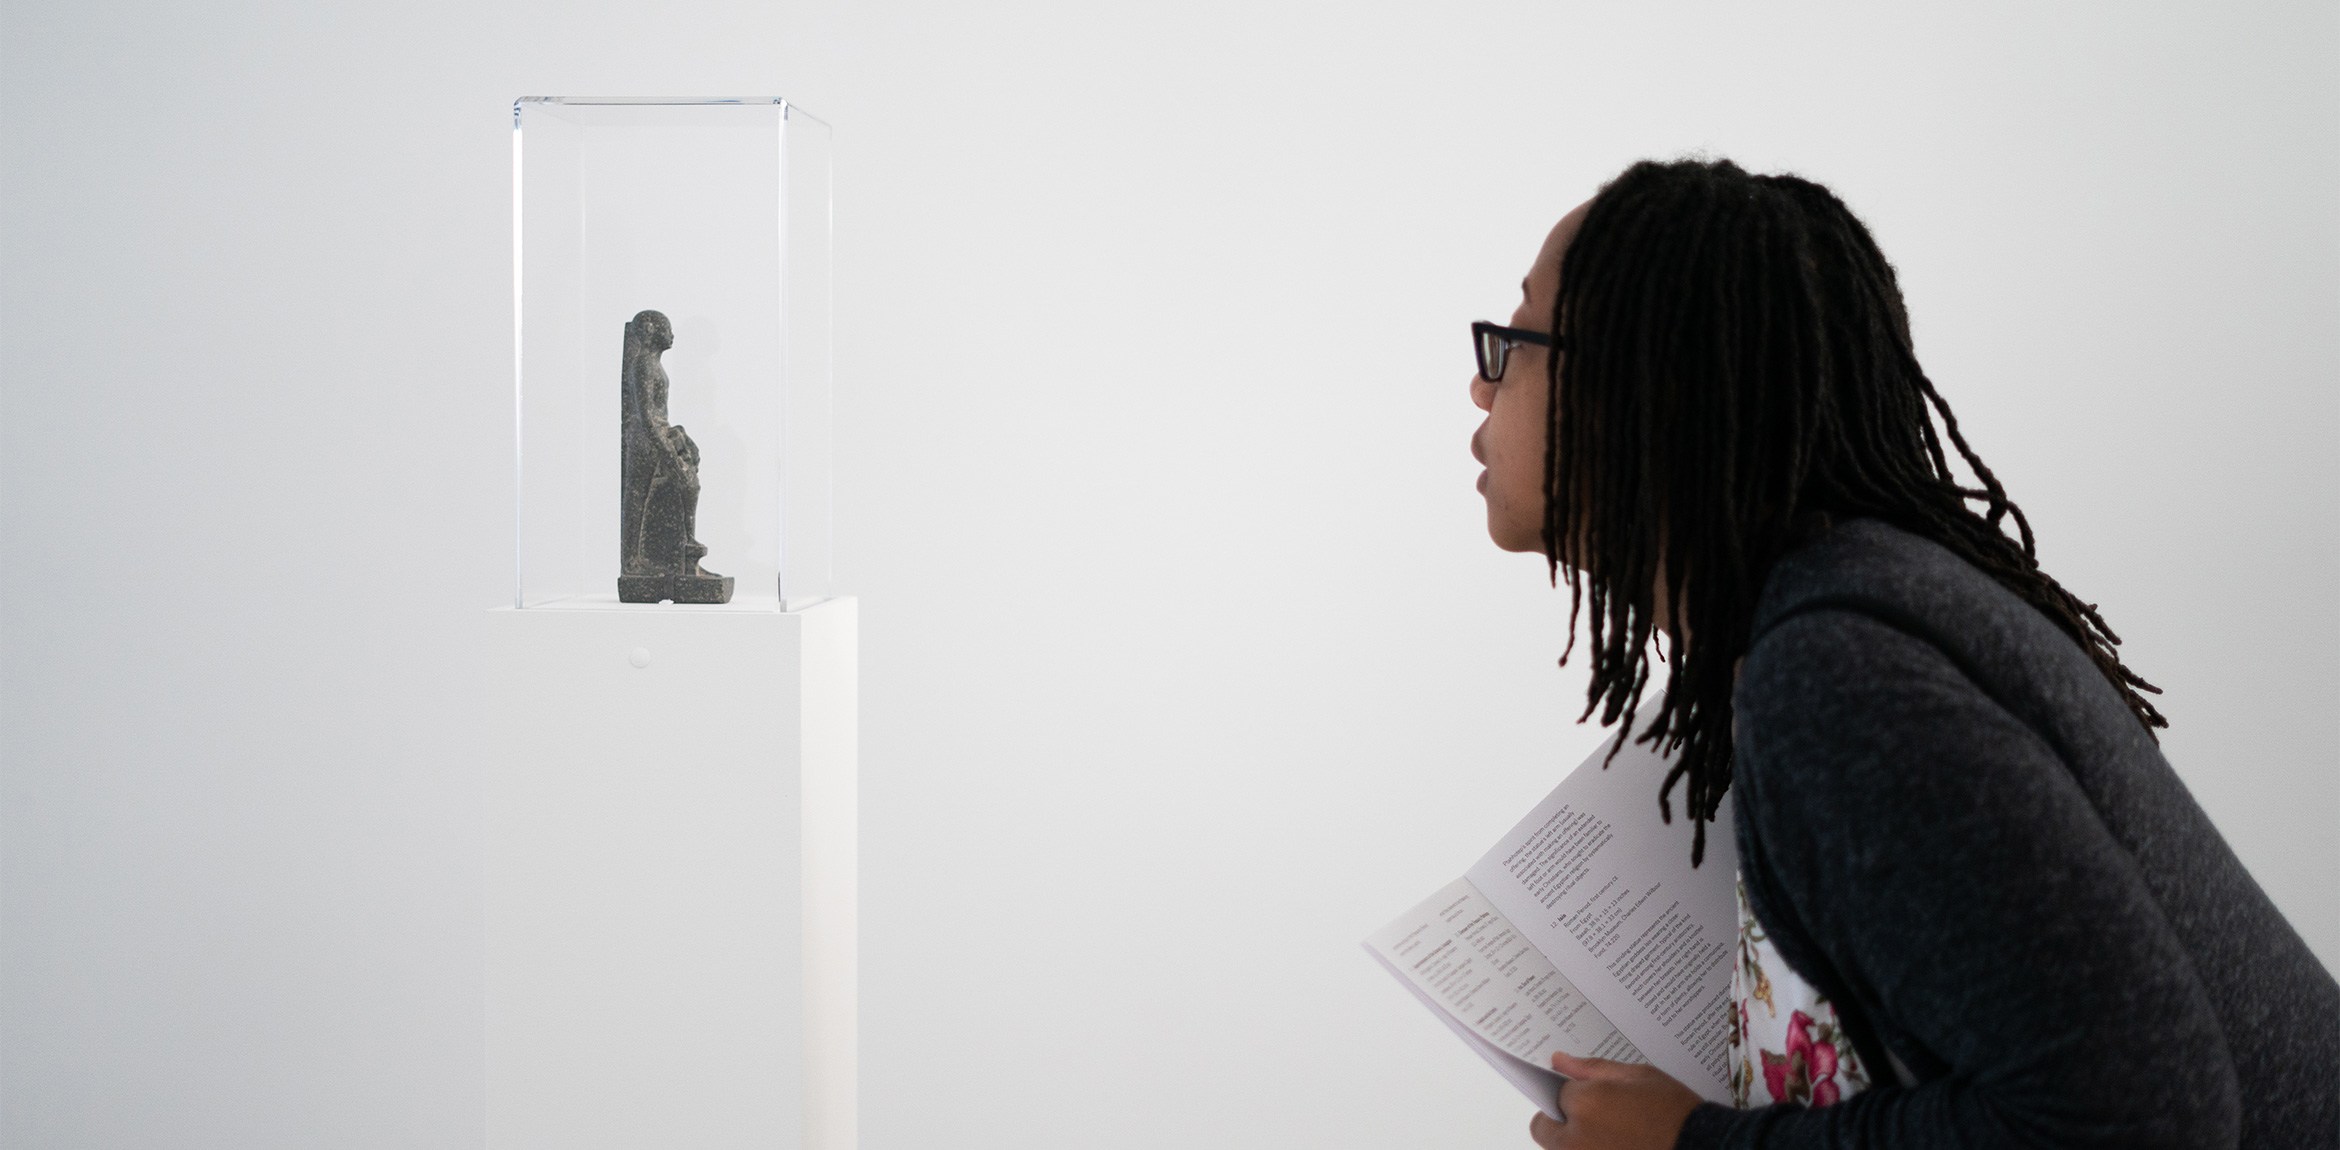 Visitor leaning forward and looking at small ancient Egyptian figure inside of a slim vitrine